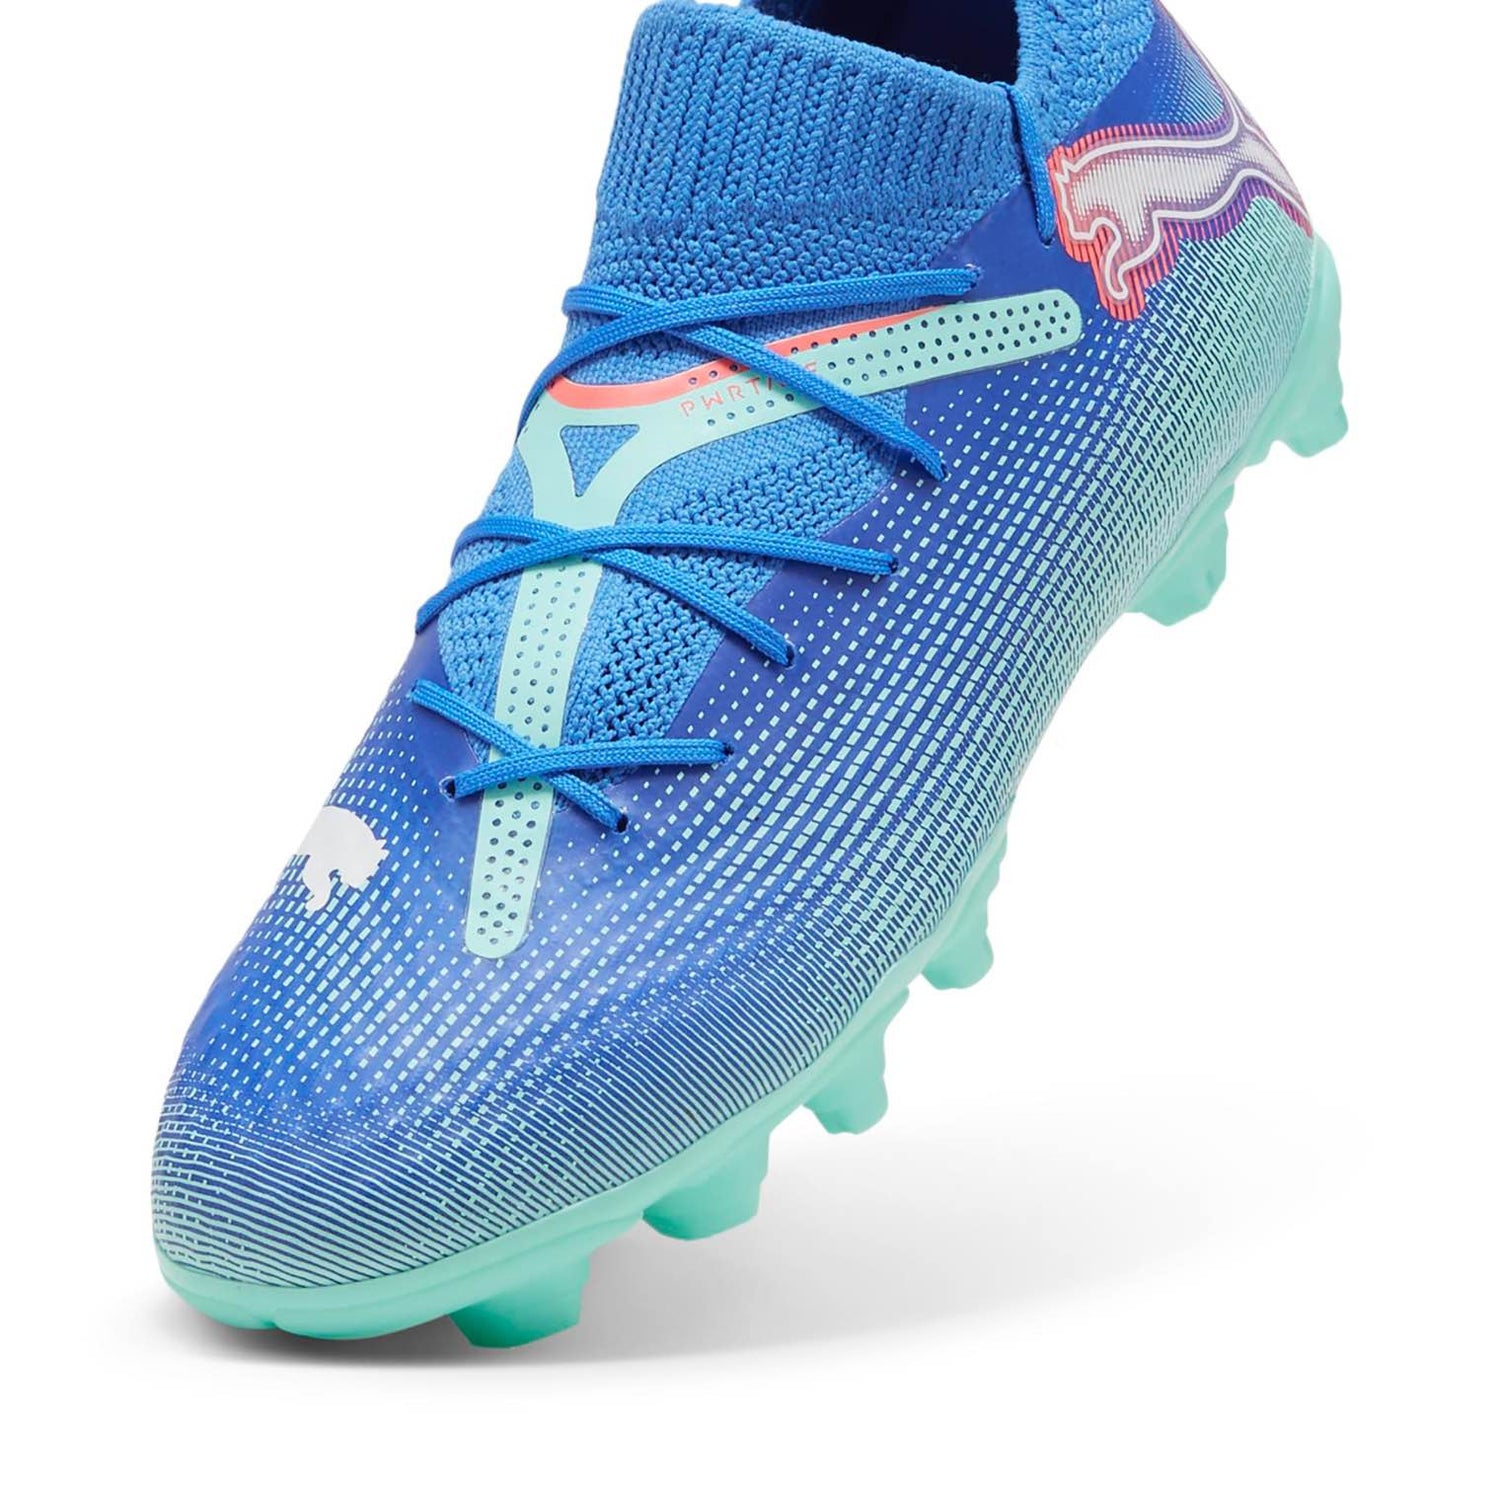 PUMA FUTURE 7 Pro Jr. soccer cleats with adaptive fit and superior traction